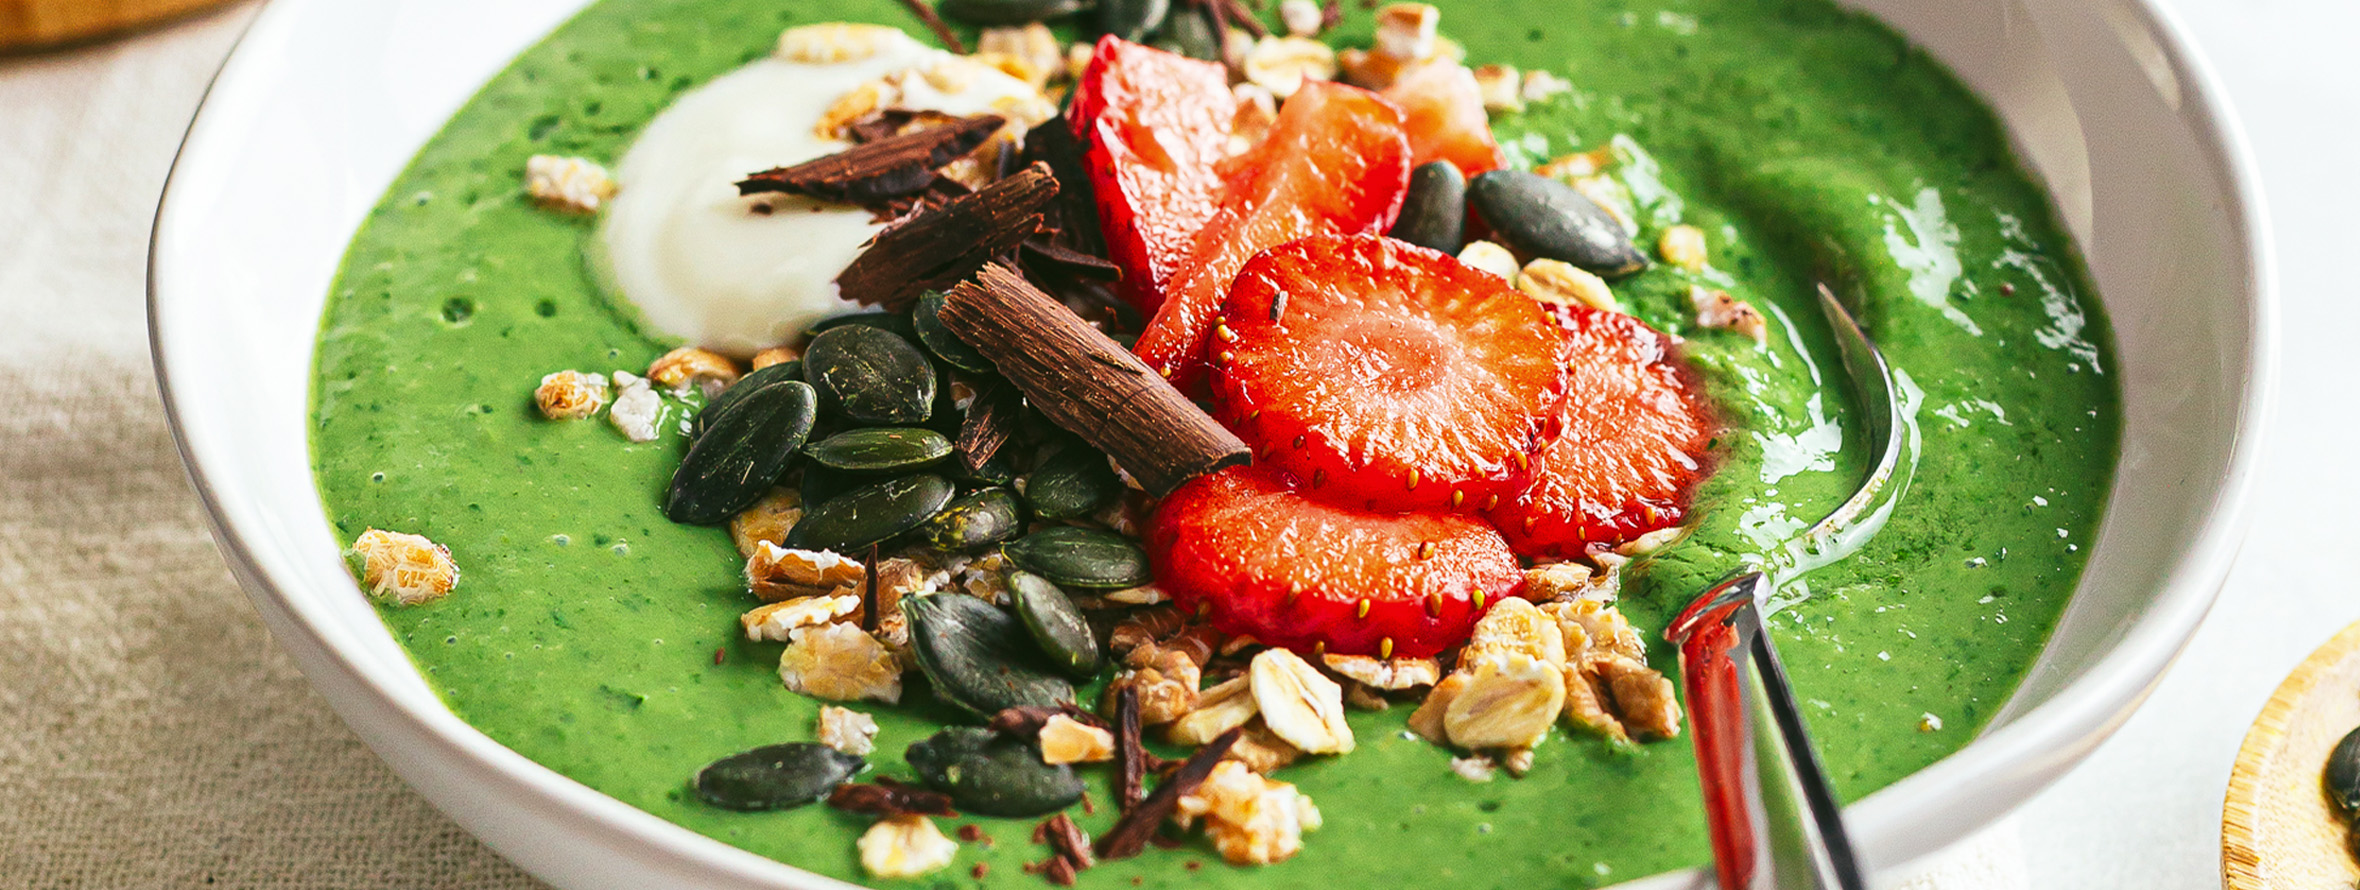 green spinach smoothie bowl with strawberries and oats